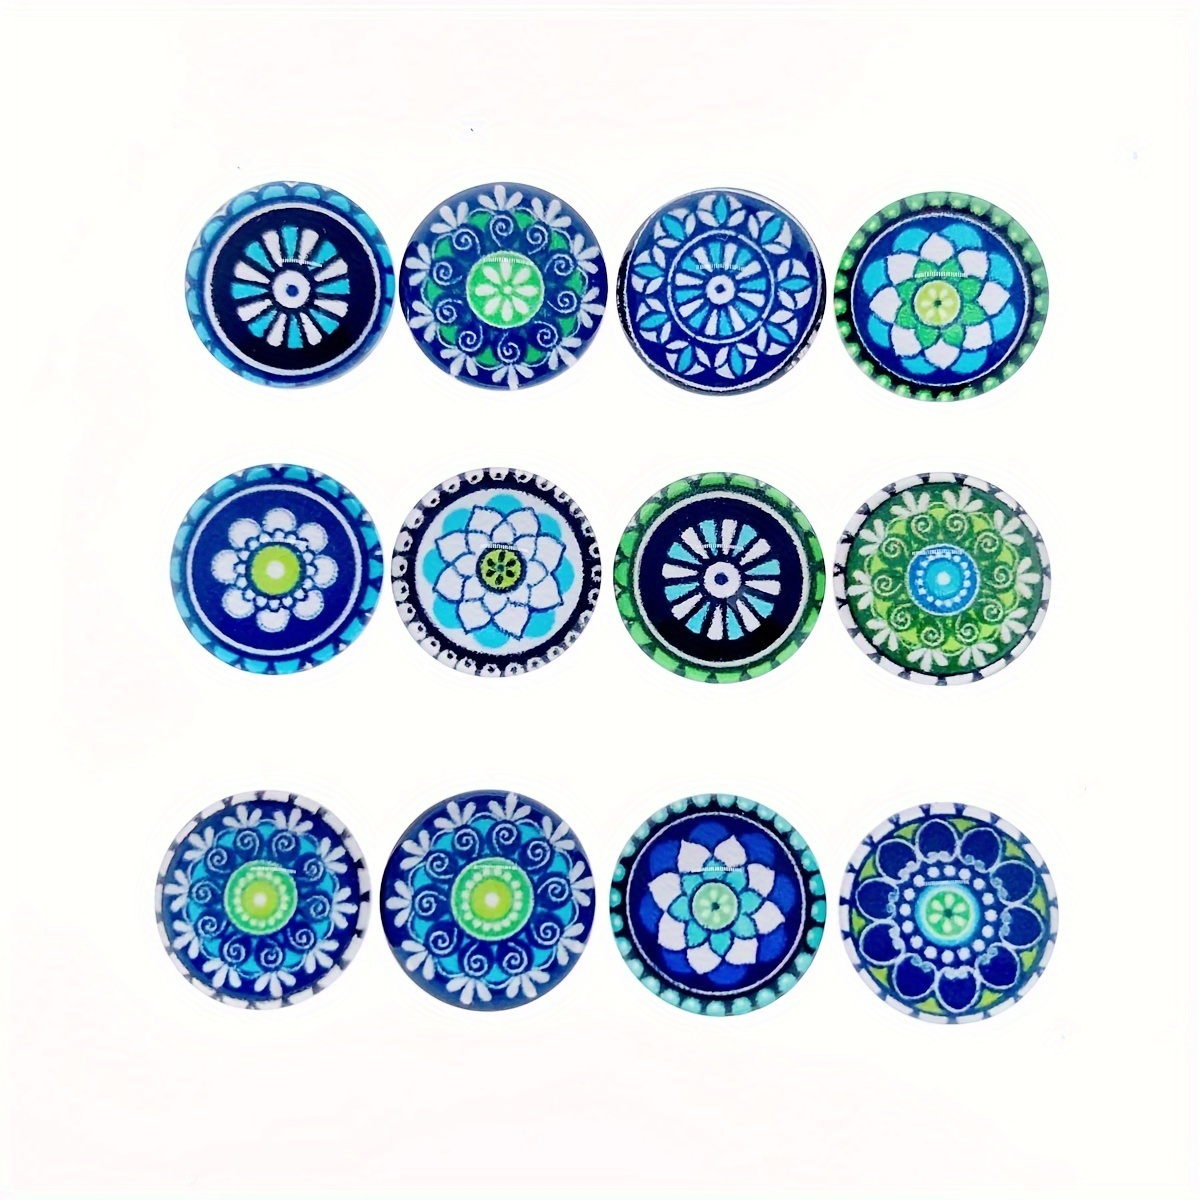 

50pcs (25 Pairs) 12mm Blue Round Glass Cabochon Beads, Assorted Vintage Floral Patterns, Mixed Colors, Jewelry Making Supplies, Craft Accessories